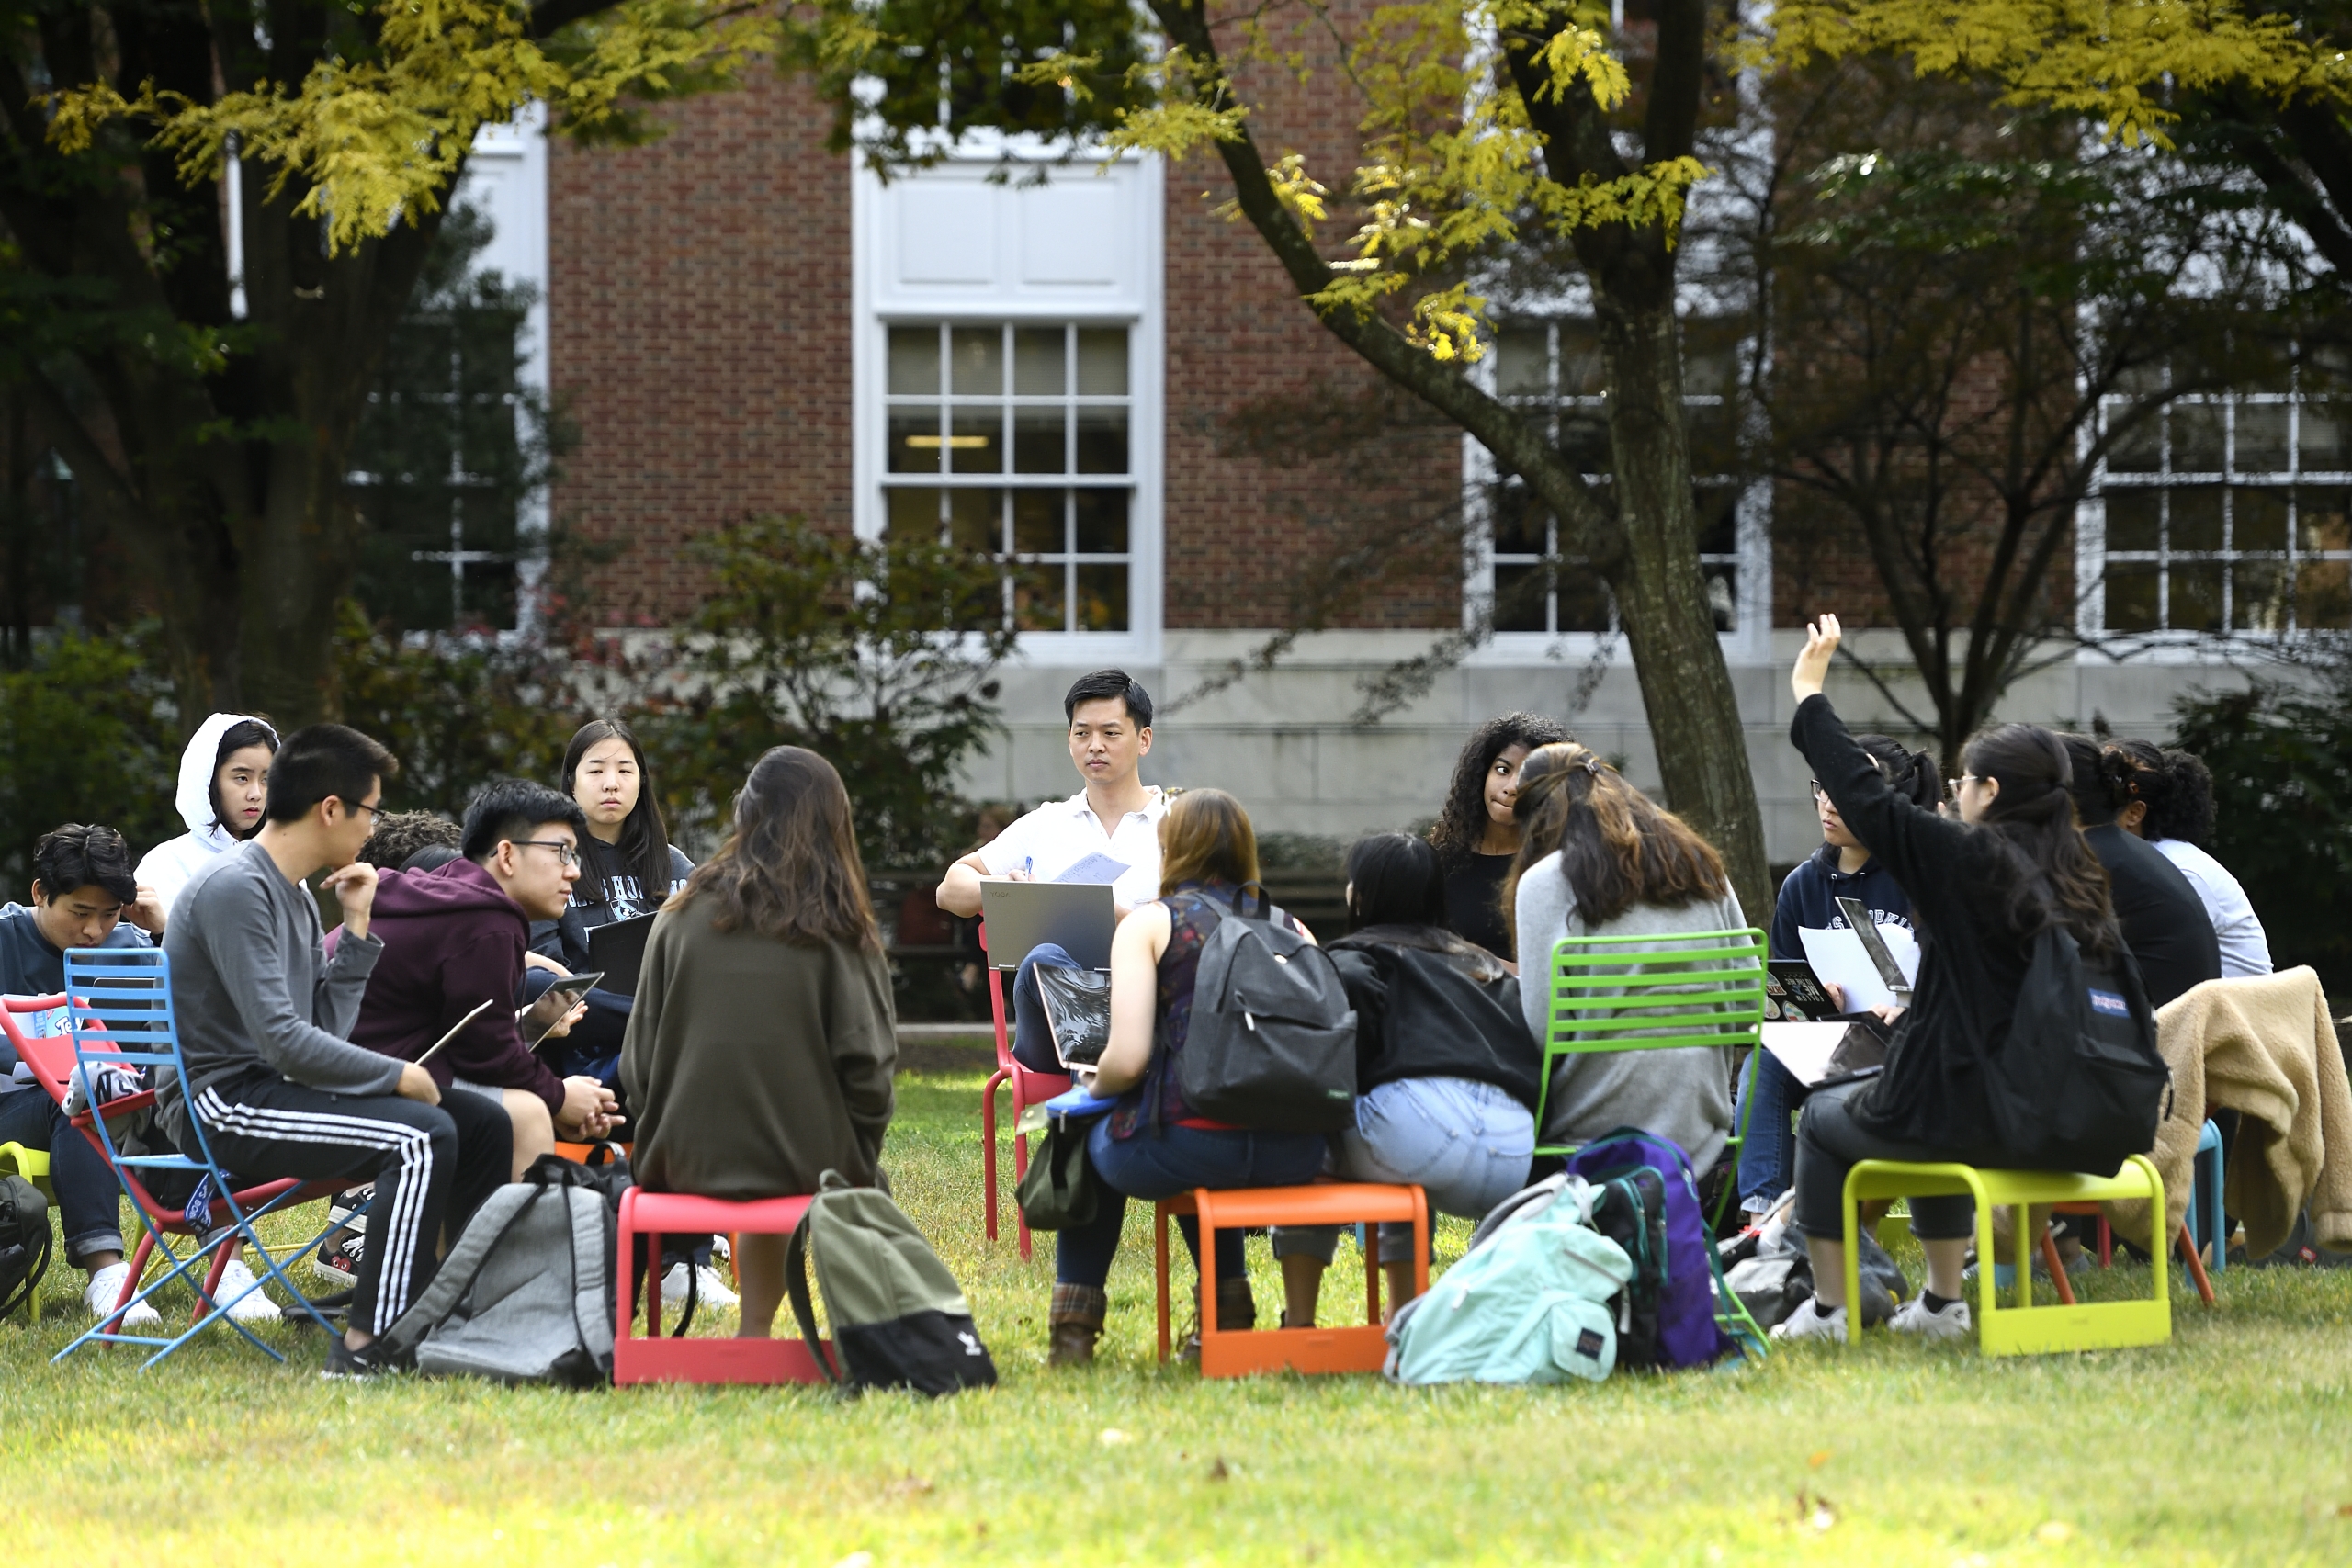 A large group of of about 12 students sitting in a circle on color metal chairs having a discussion outside on a college quad.